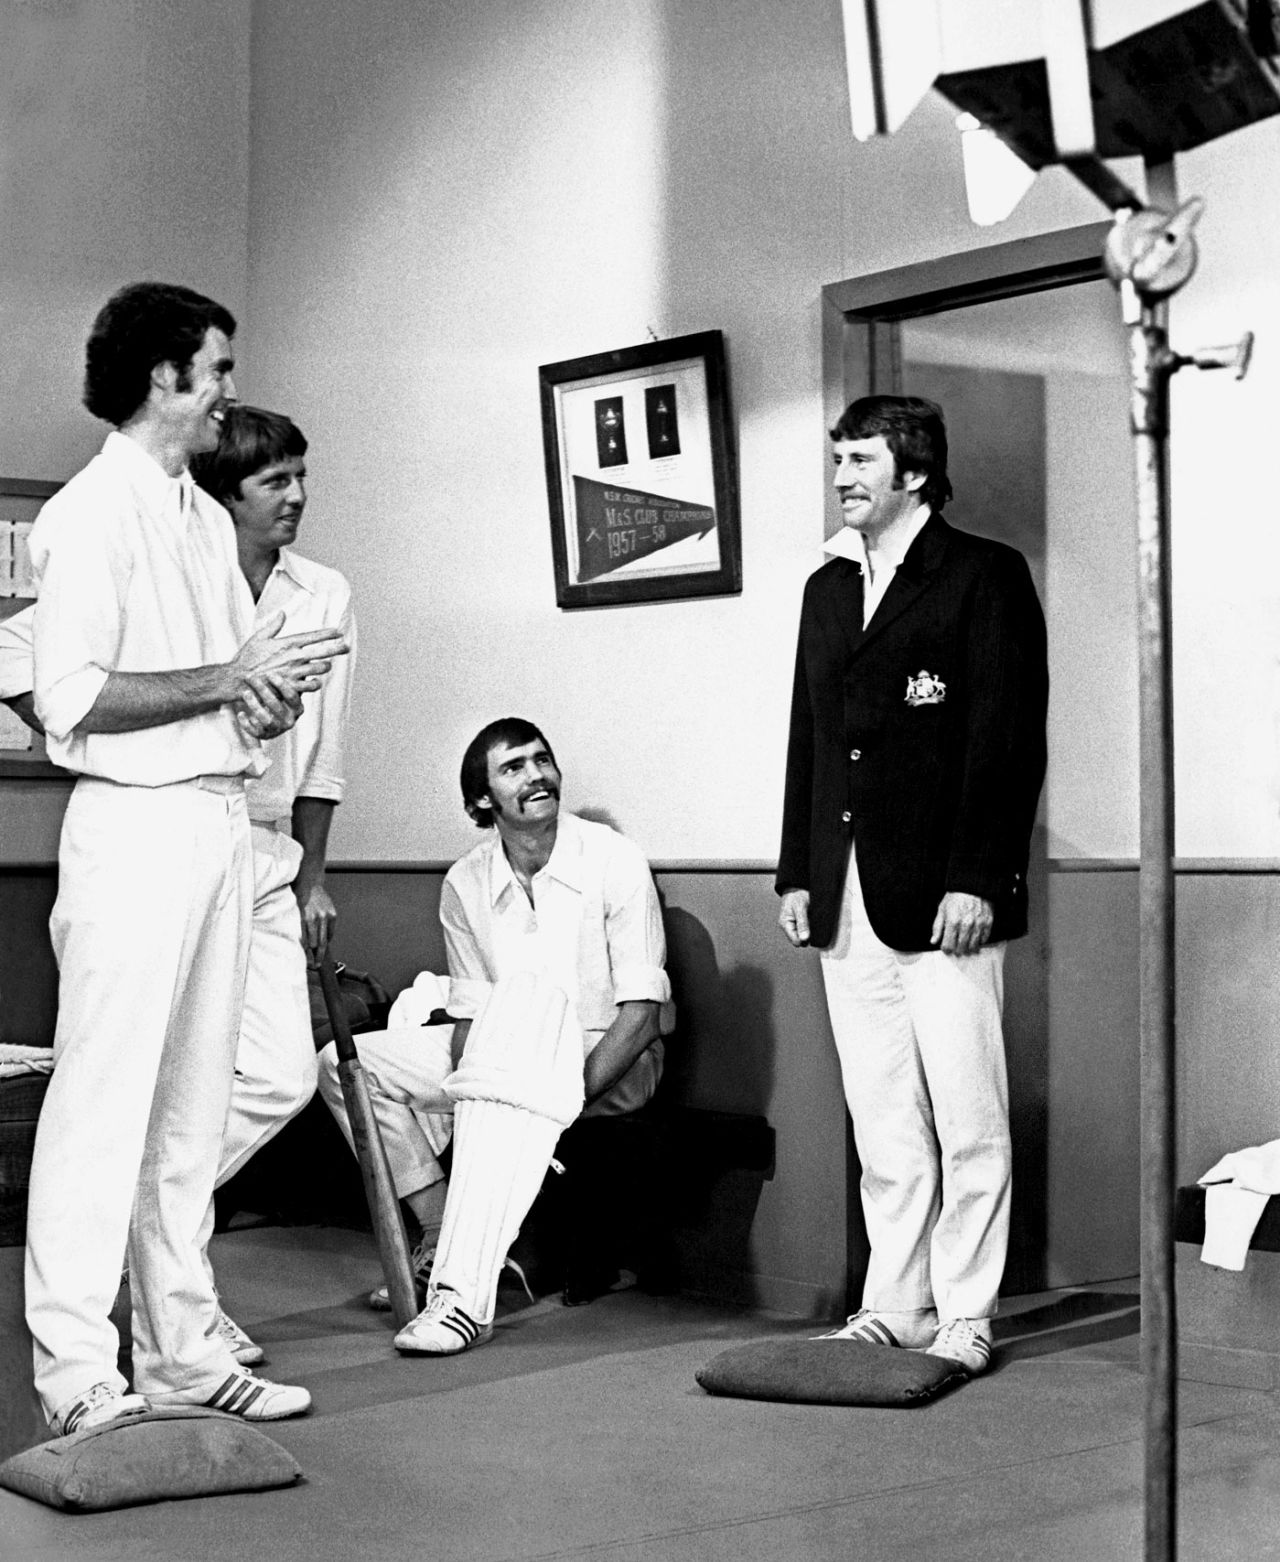 Ian Chappell, Greg Chappell, Jeff Thomson and Richie Robinson shoot a TV commercial at the SCG, April 1975